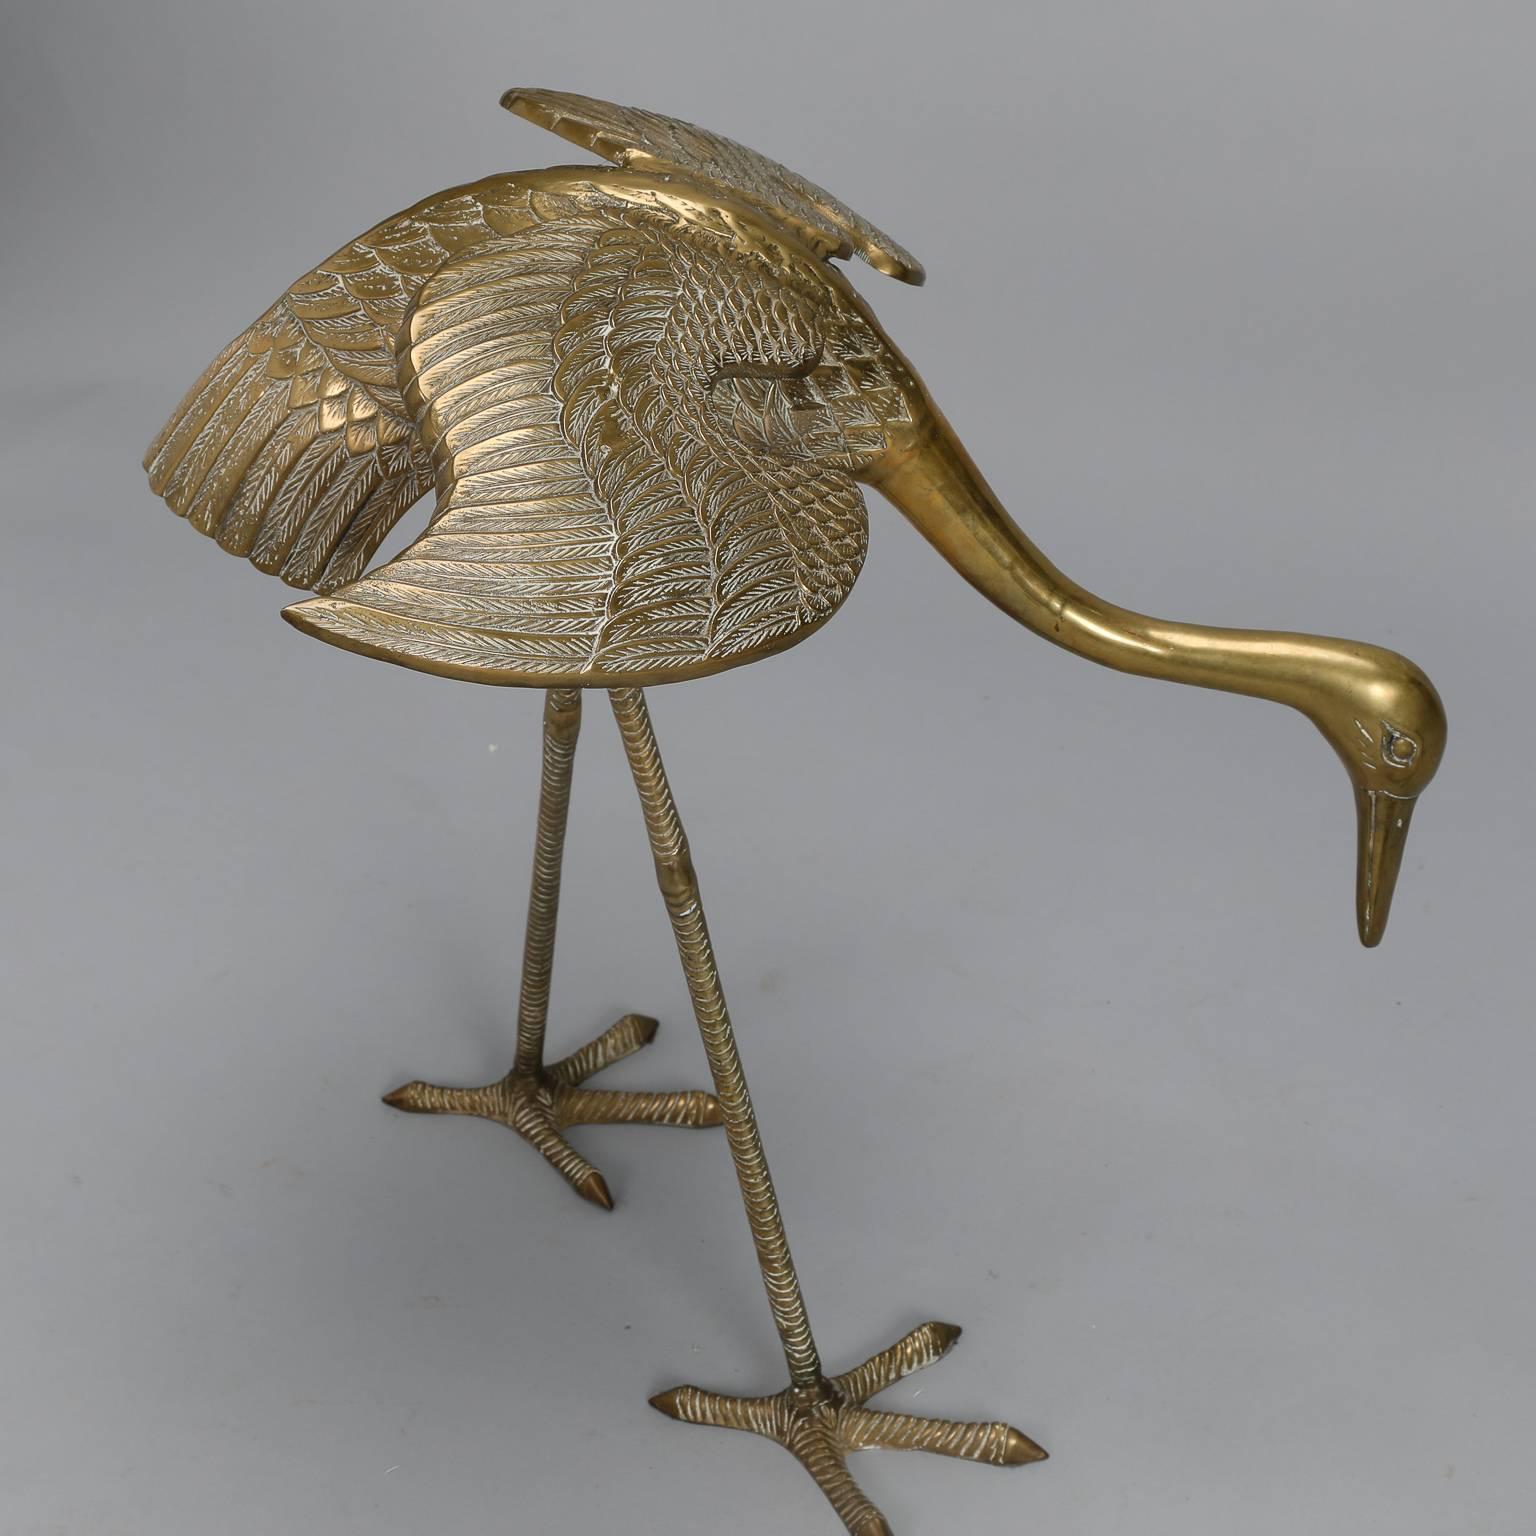 This pair of circa 1960s cast brass crane or heron sculptures is just under 40” tall. Rendered in fine detail, each bird stands on its own and can be displayed separately or together as a pair. Unknown origin - found in Italy. Measurements shown are